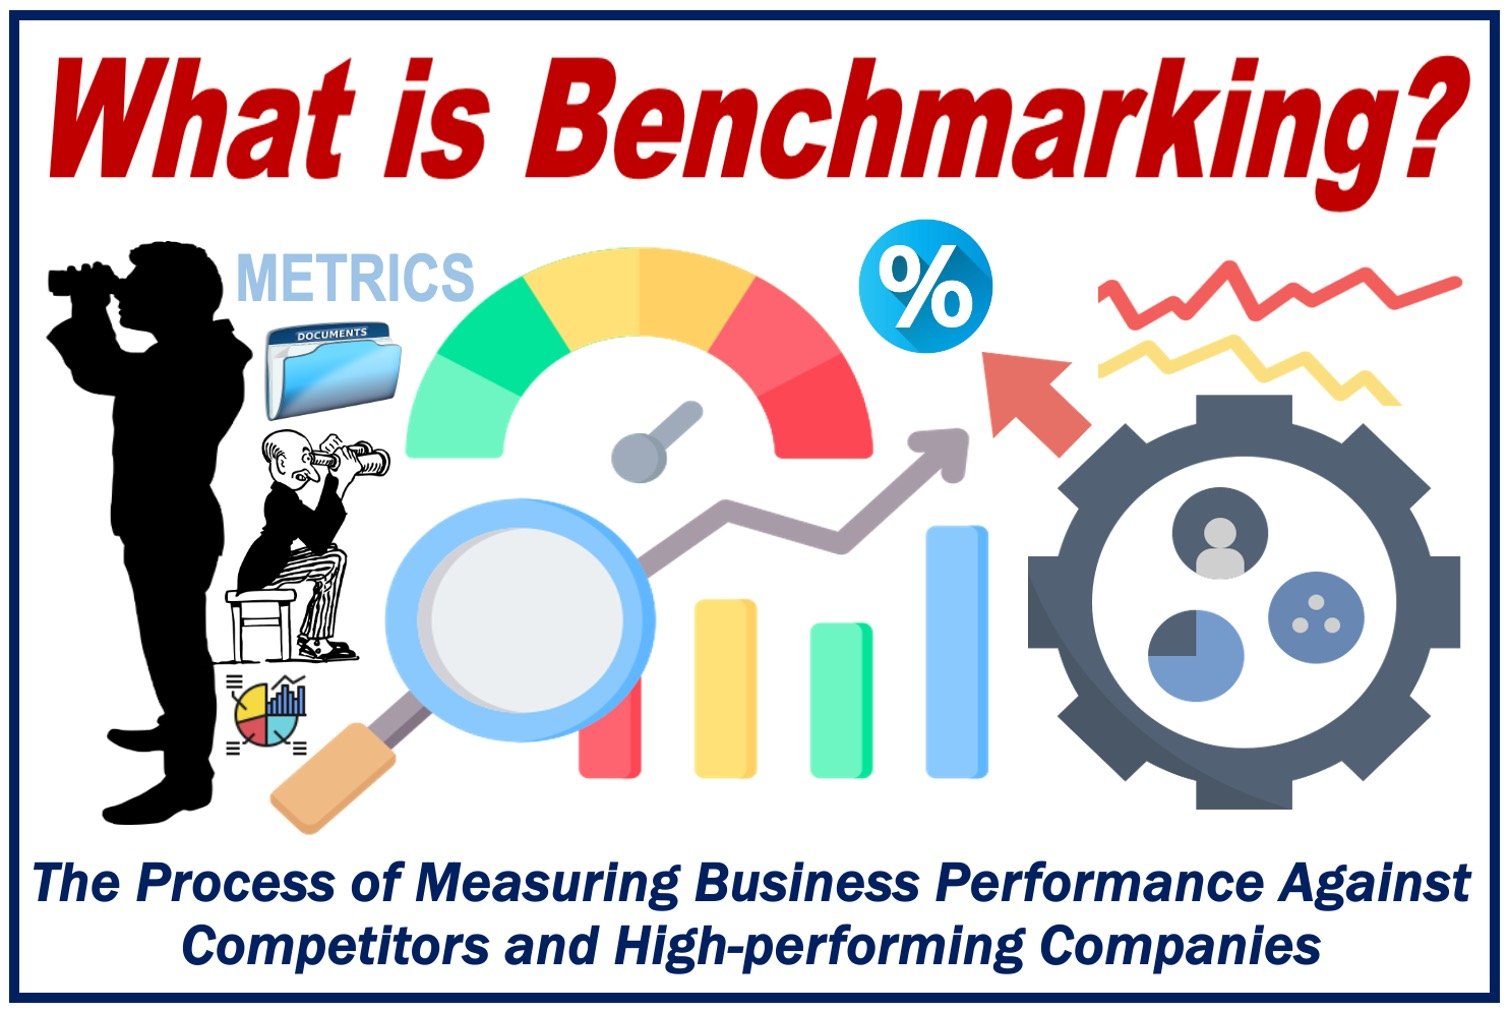 Lots of statistics plus a definition of benchmarking.